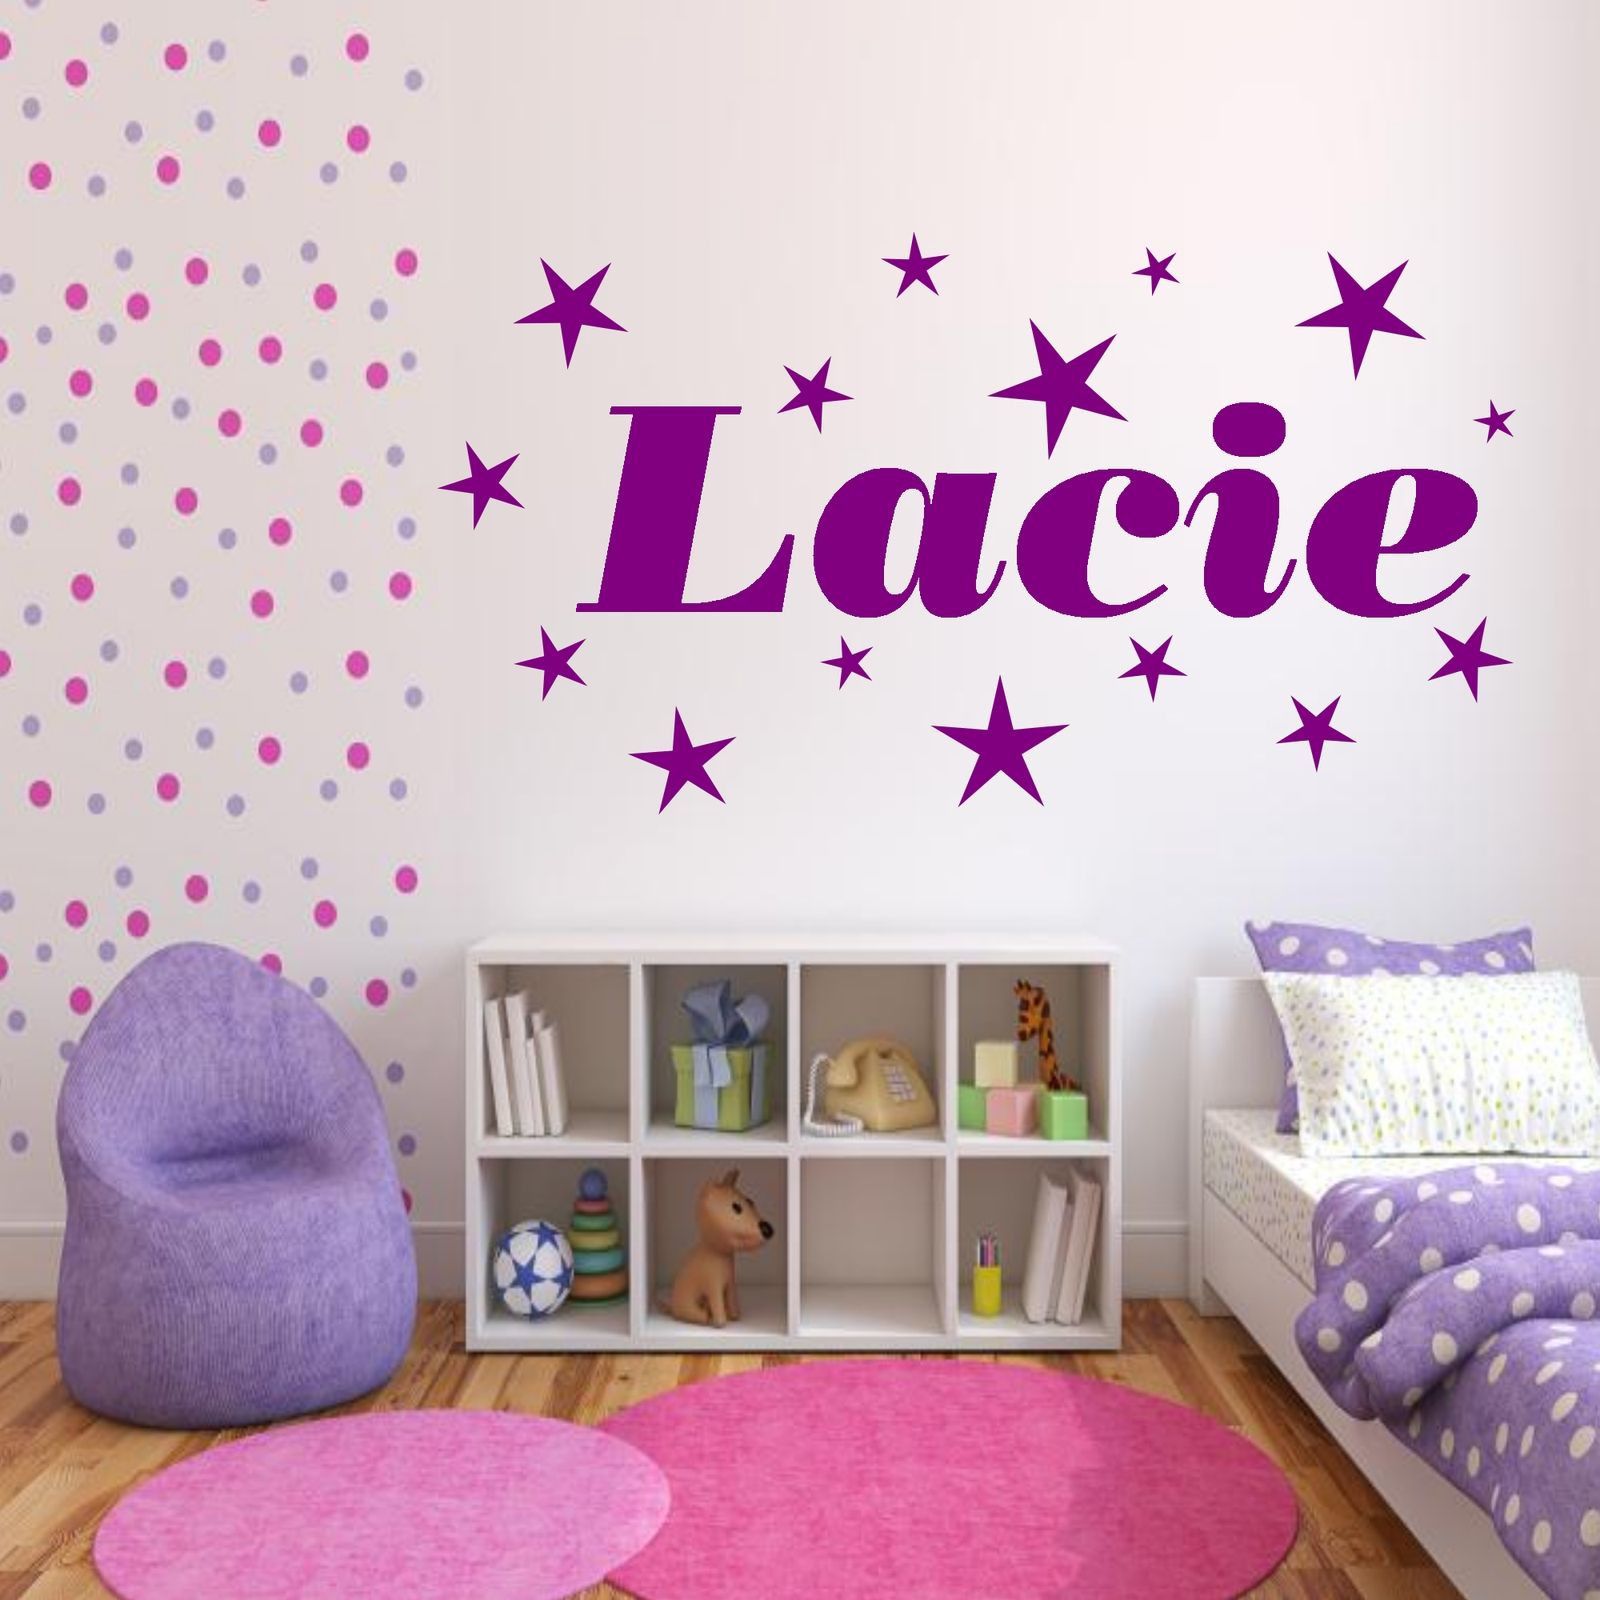 Girls Bedroom Wall Stickers
 Personalised Stars Name Girls Bedroom Wall Art Stickers